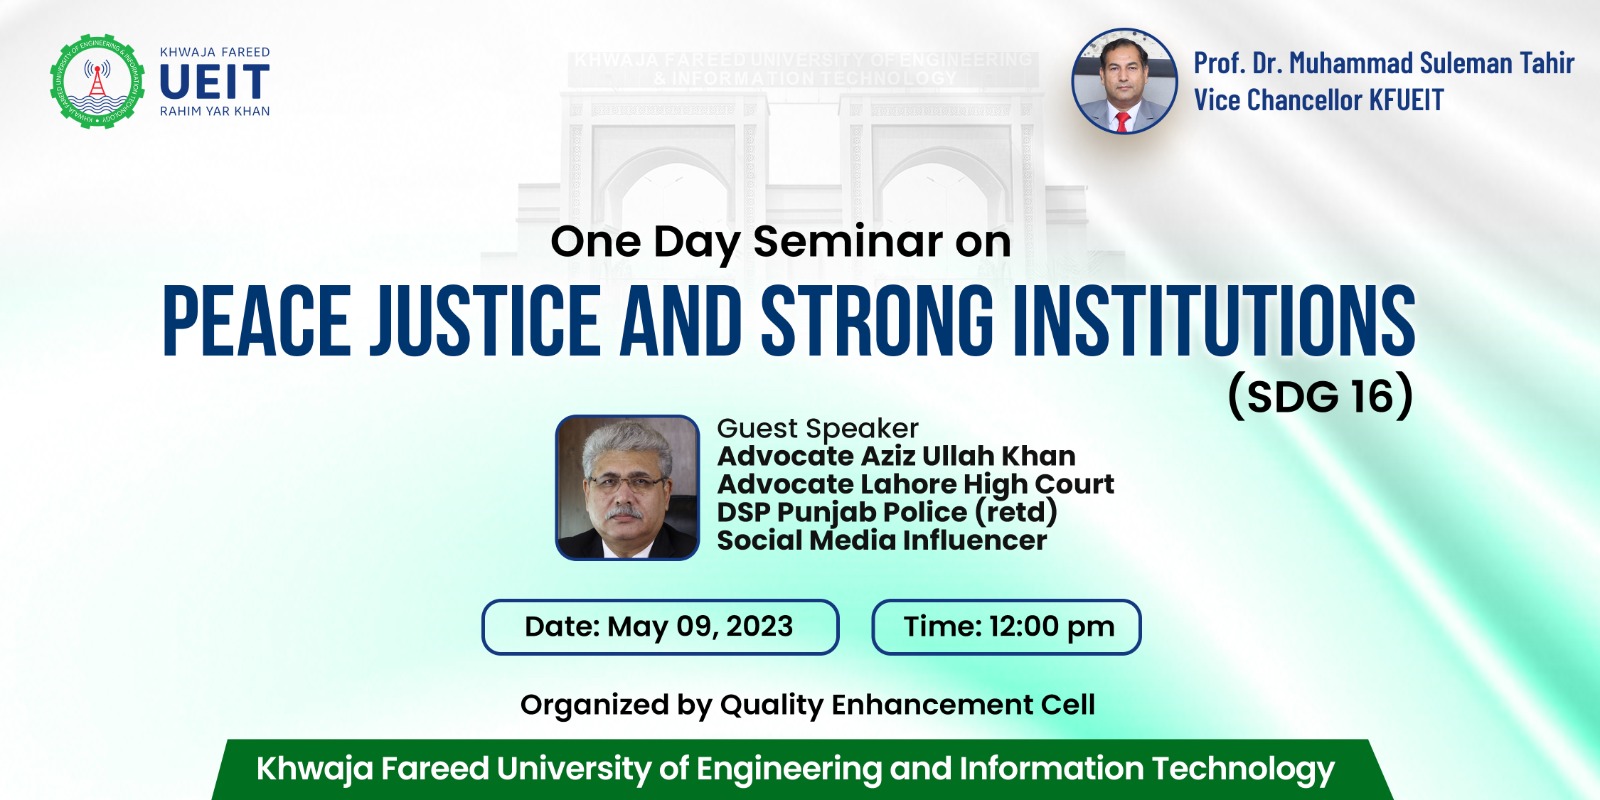 One-Day Seminar on PEace Justice and Strong Institutions (SDG 16)